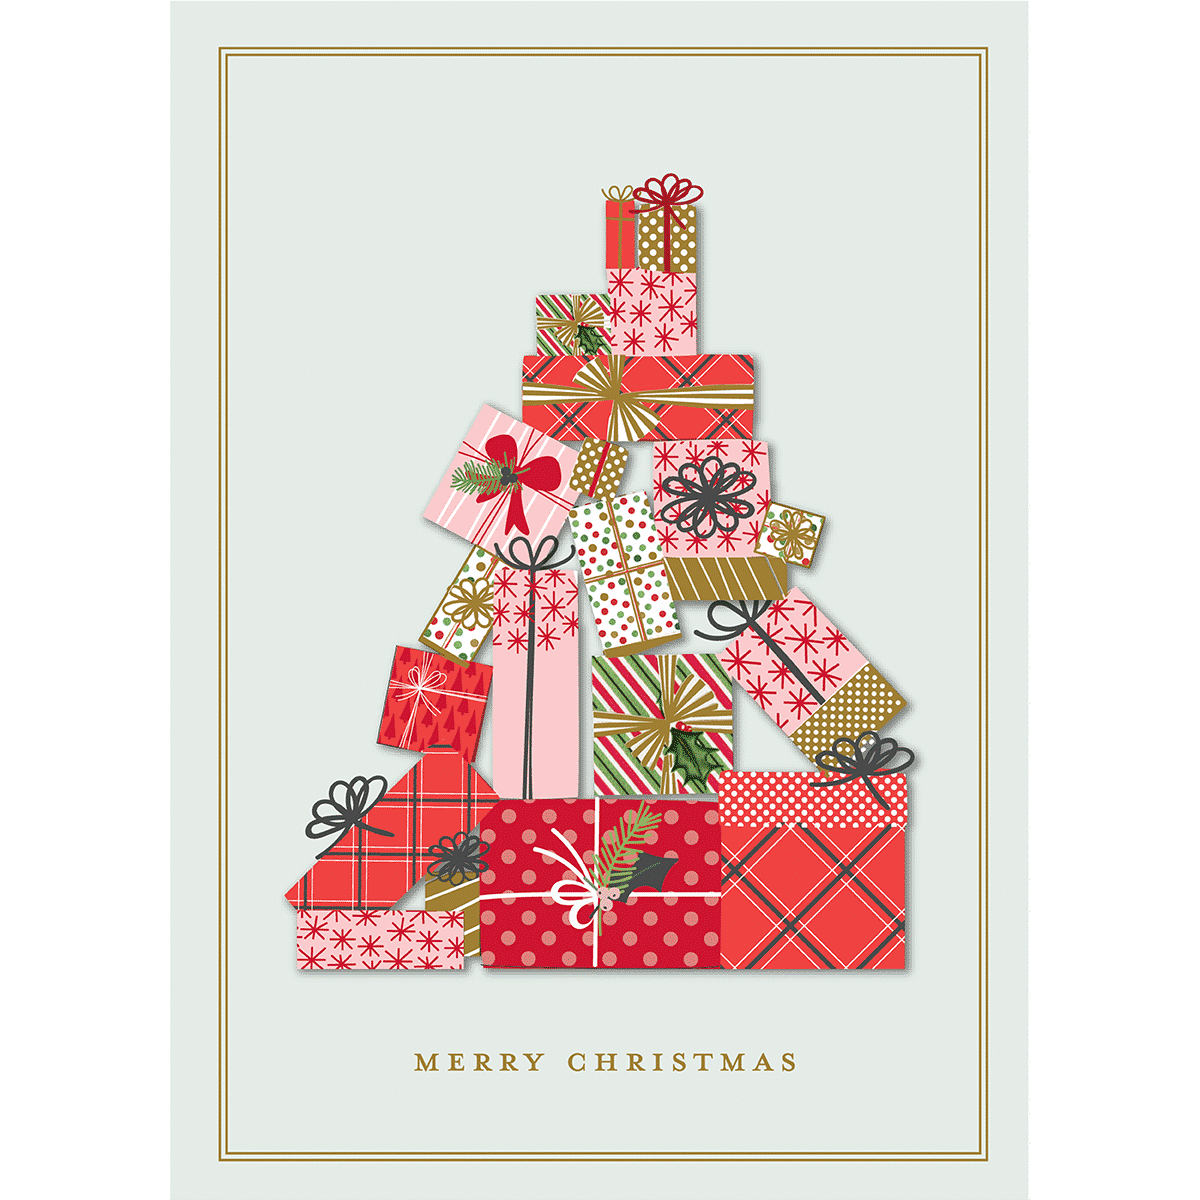 5 x 7 Holiday Greeting Cards w/ Imprinted Envelopes - Red Holiday